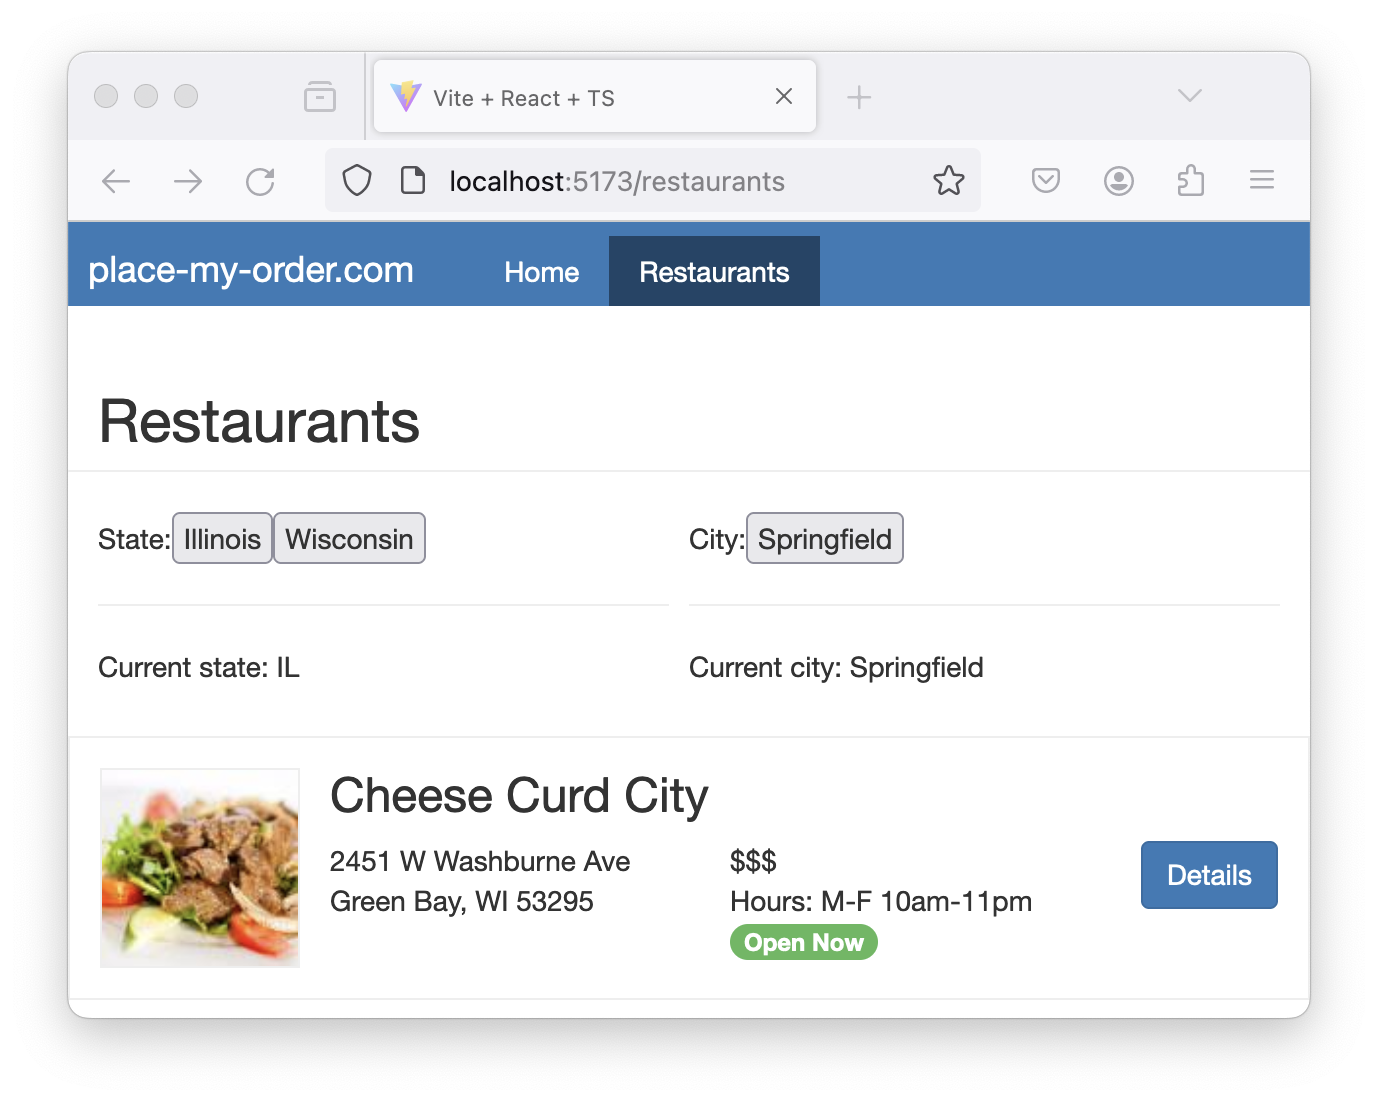 The same “Restaurants” web page from before, but this time the “Current city” is set to “Springfield”.